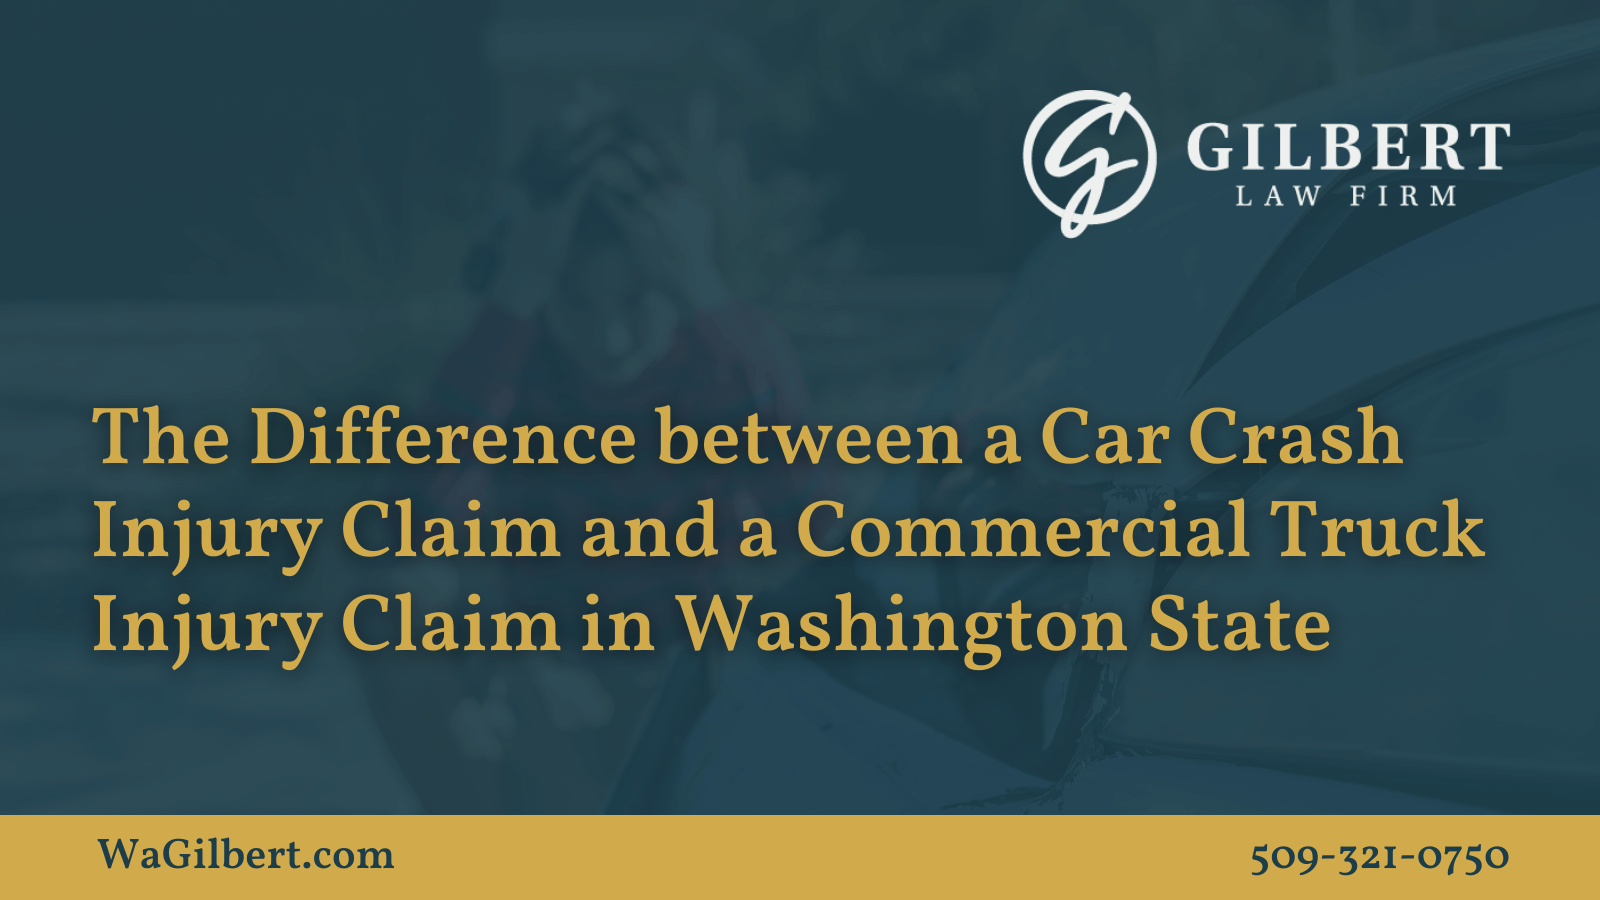 The Difference between a Car Crash Injury Claim and a Commercial Truck Injury Claim in Washington State | Gilbert Law Firm Spokane Washington